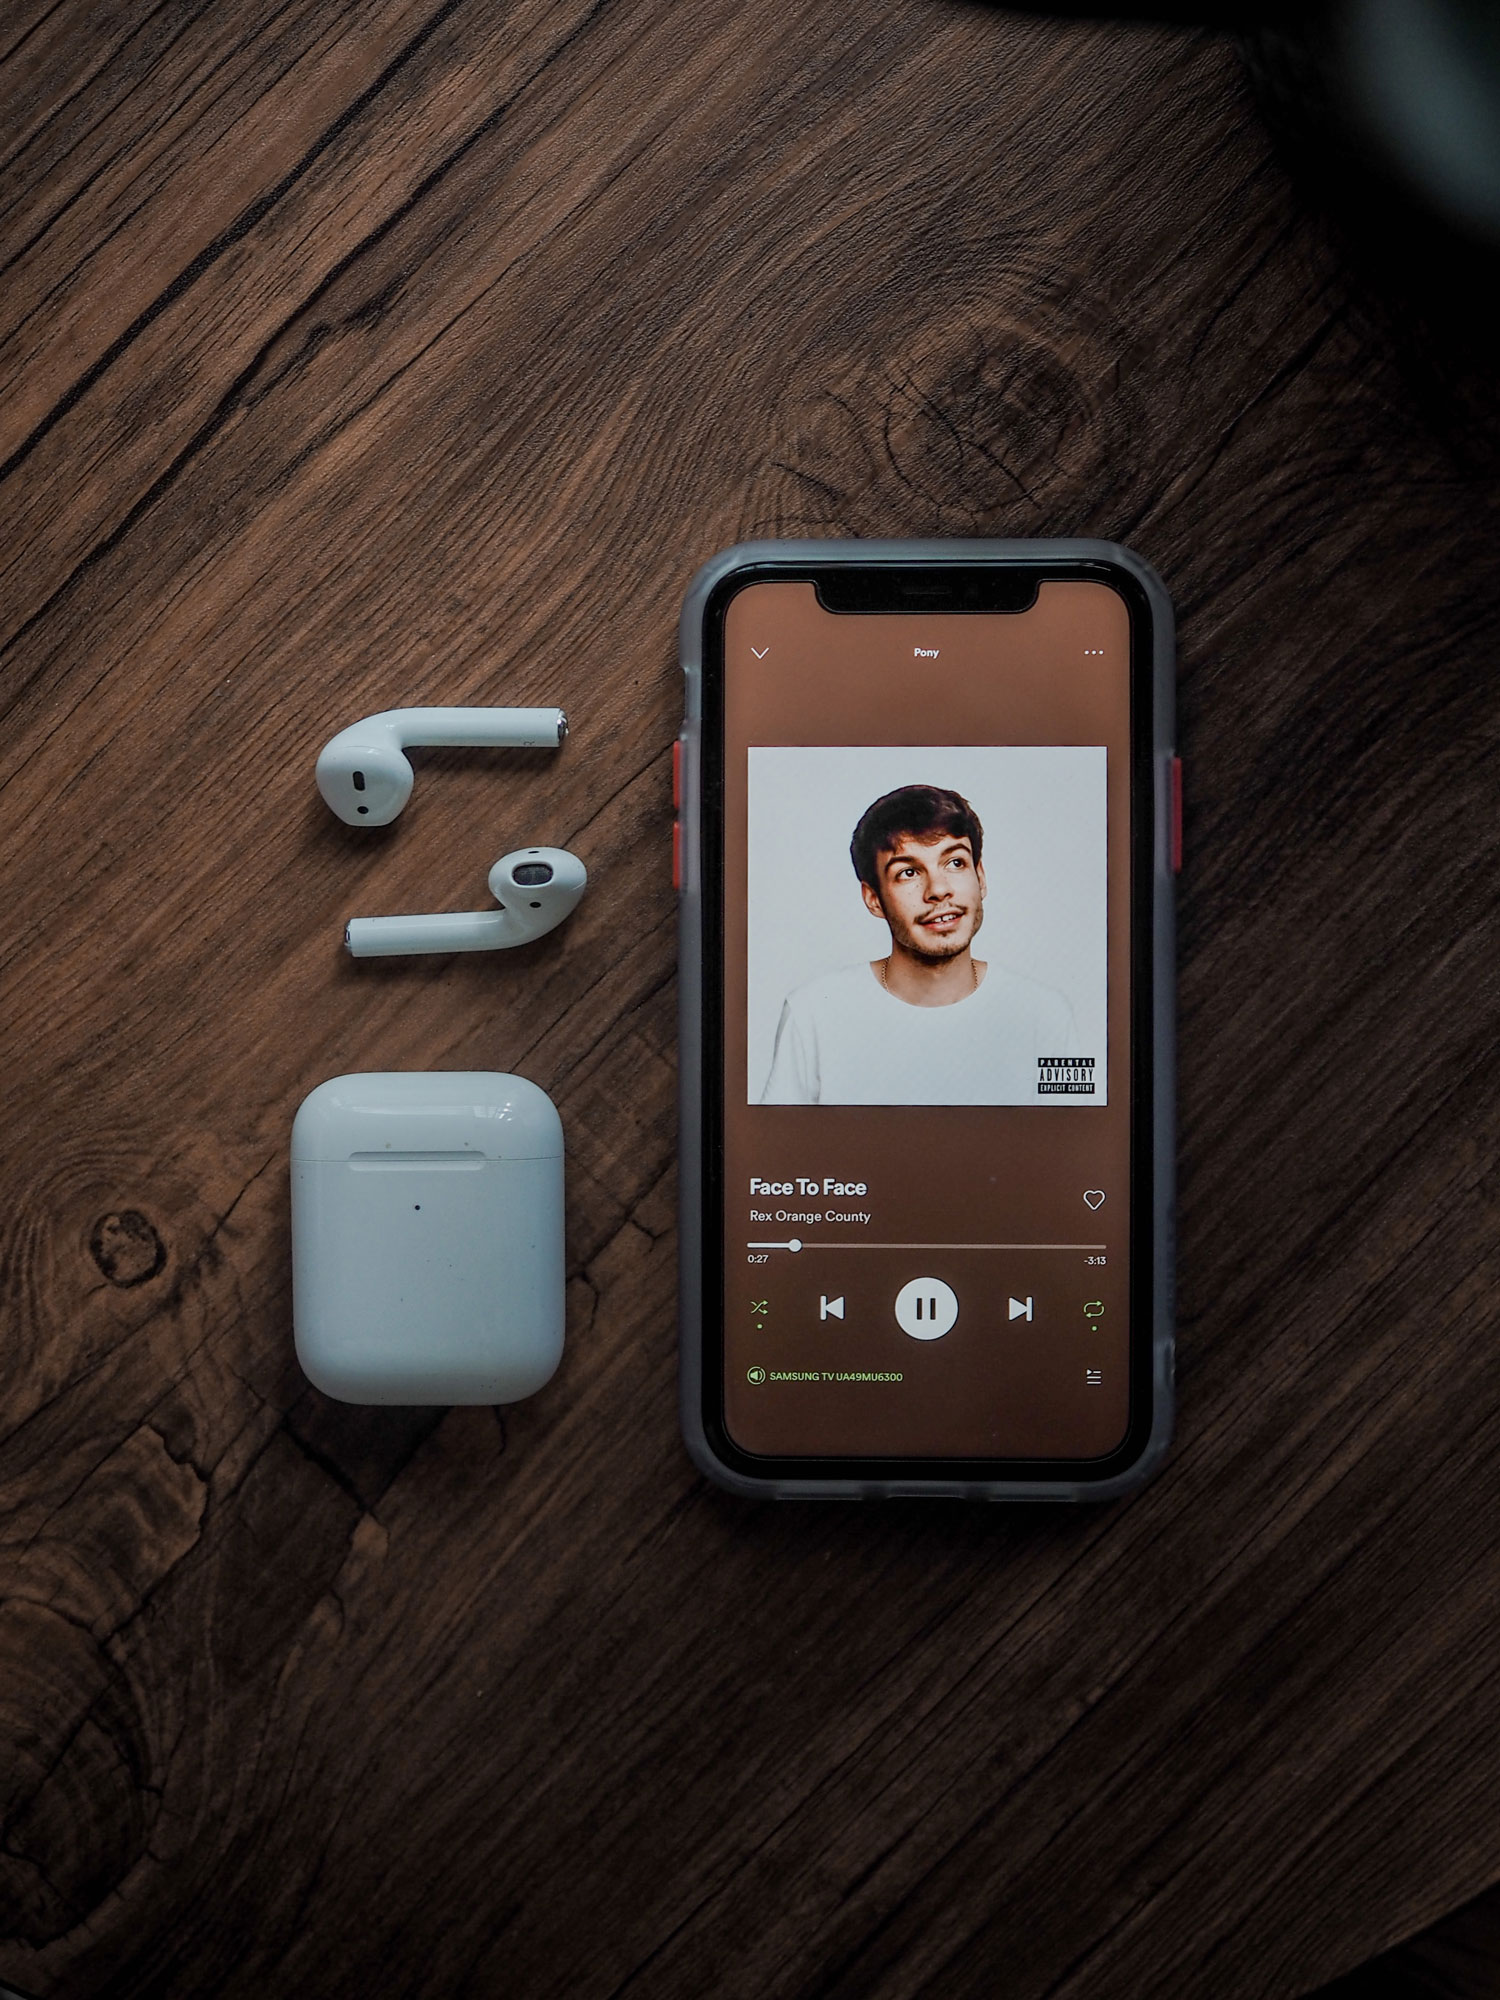 Download Free iPhone Mockup with AirPods on a Wooden Table - Free ...